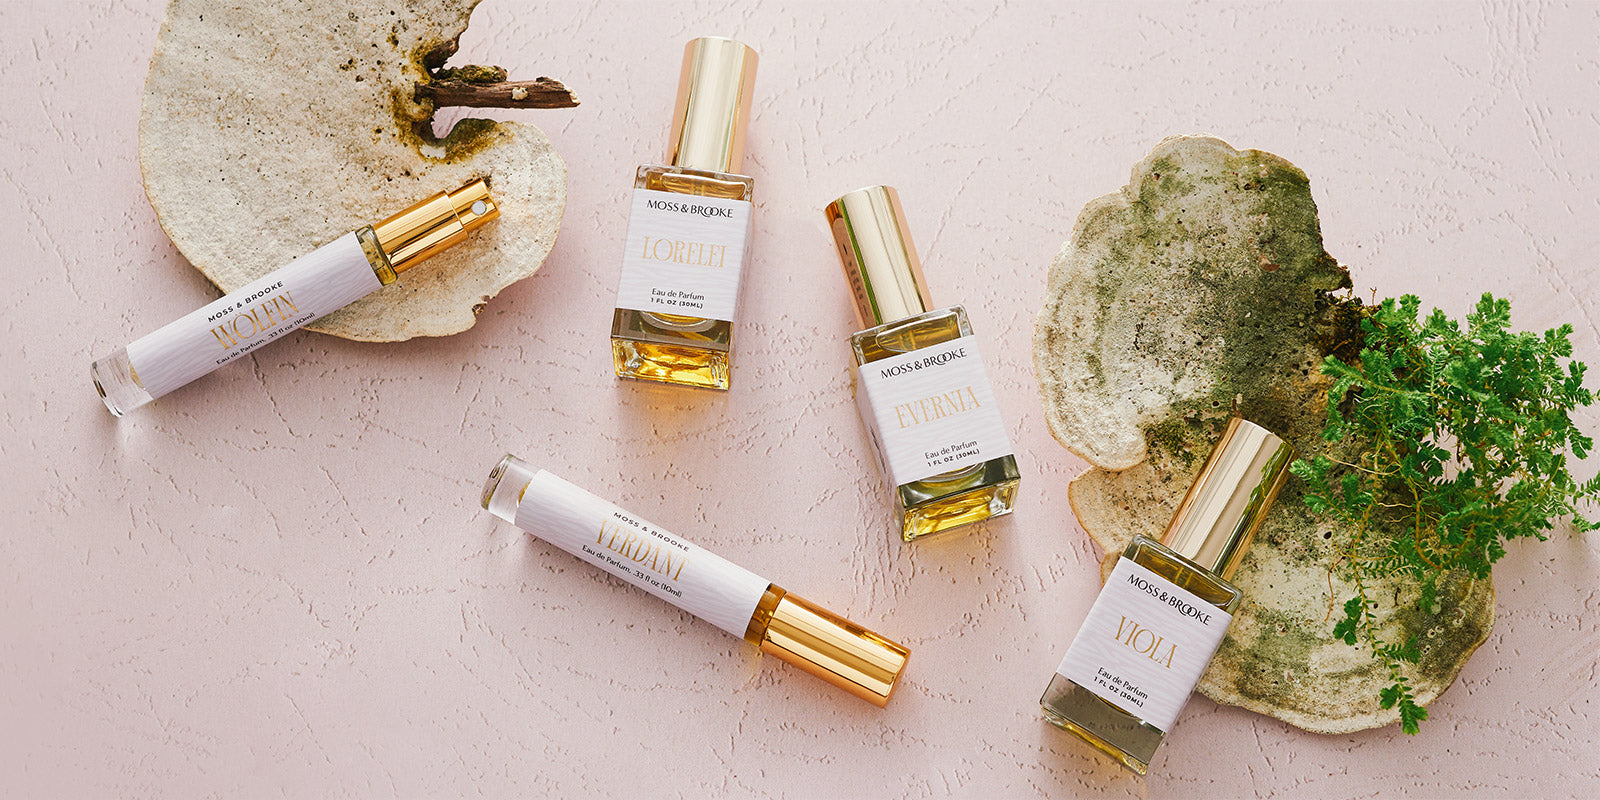 The Moss & Brooke botanical perfume range (featuring minimal packaging and gold foil) sits on a minimal background with lush natural elements.